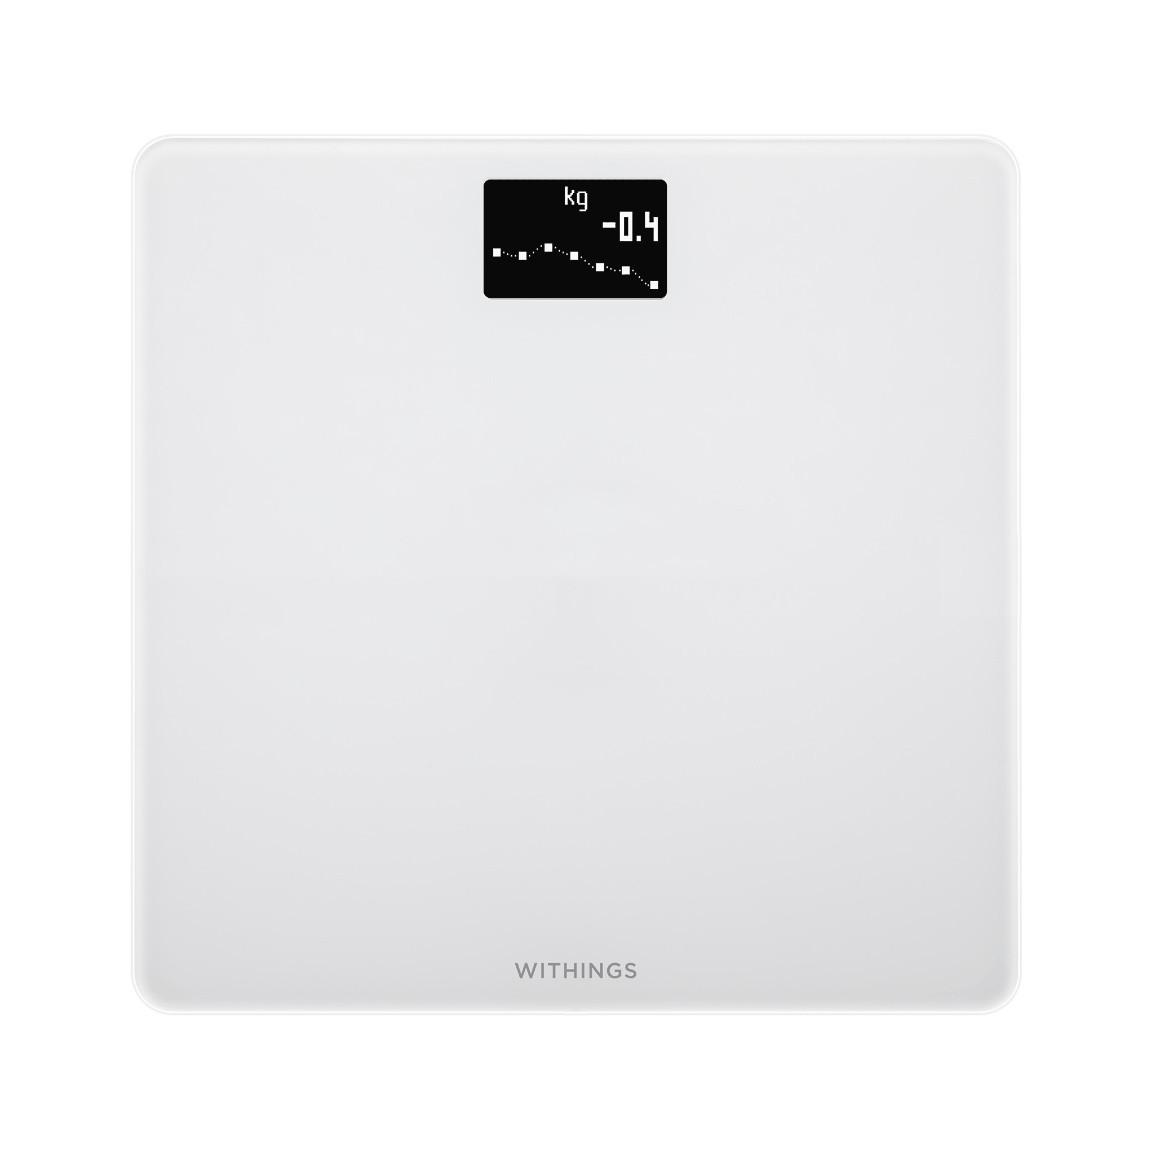 Withings Body - WLAN-Körperwaage mit BMI-Funktion - Weiß front